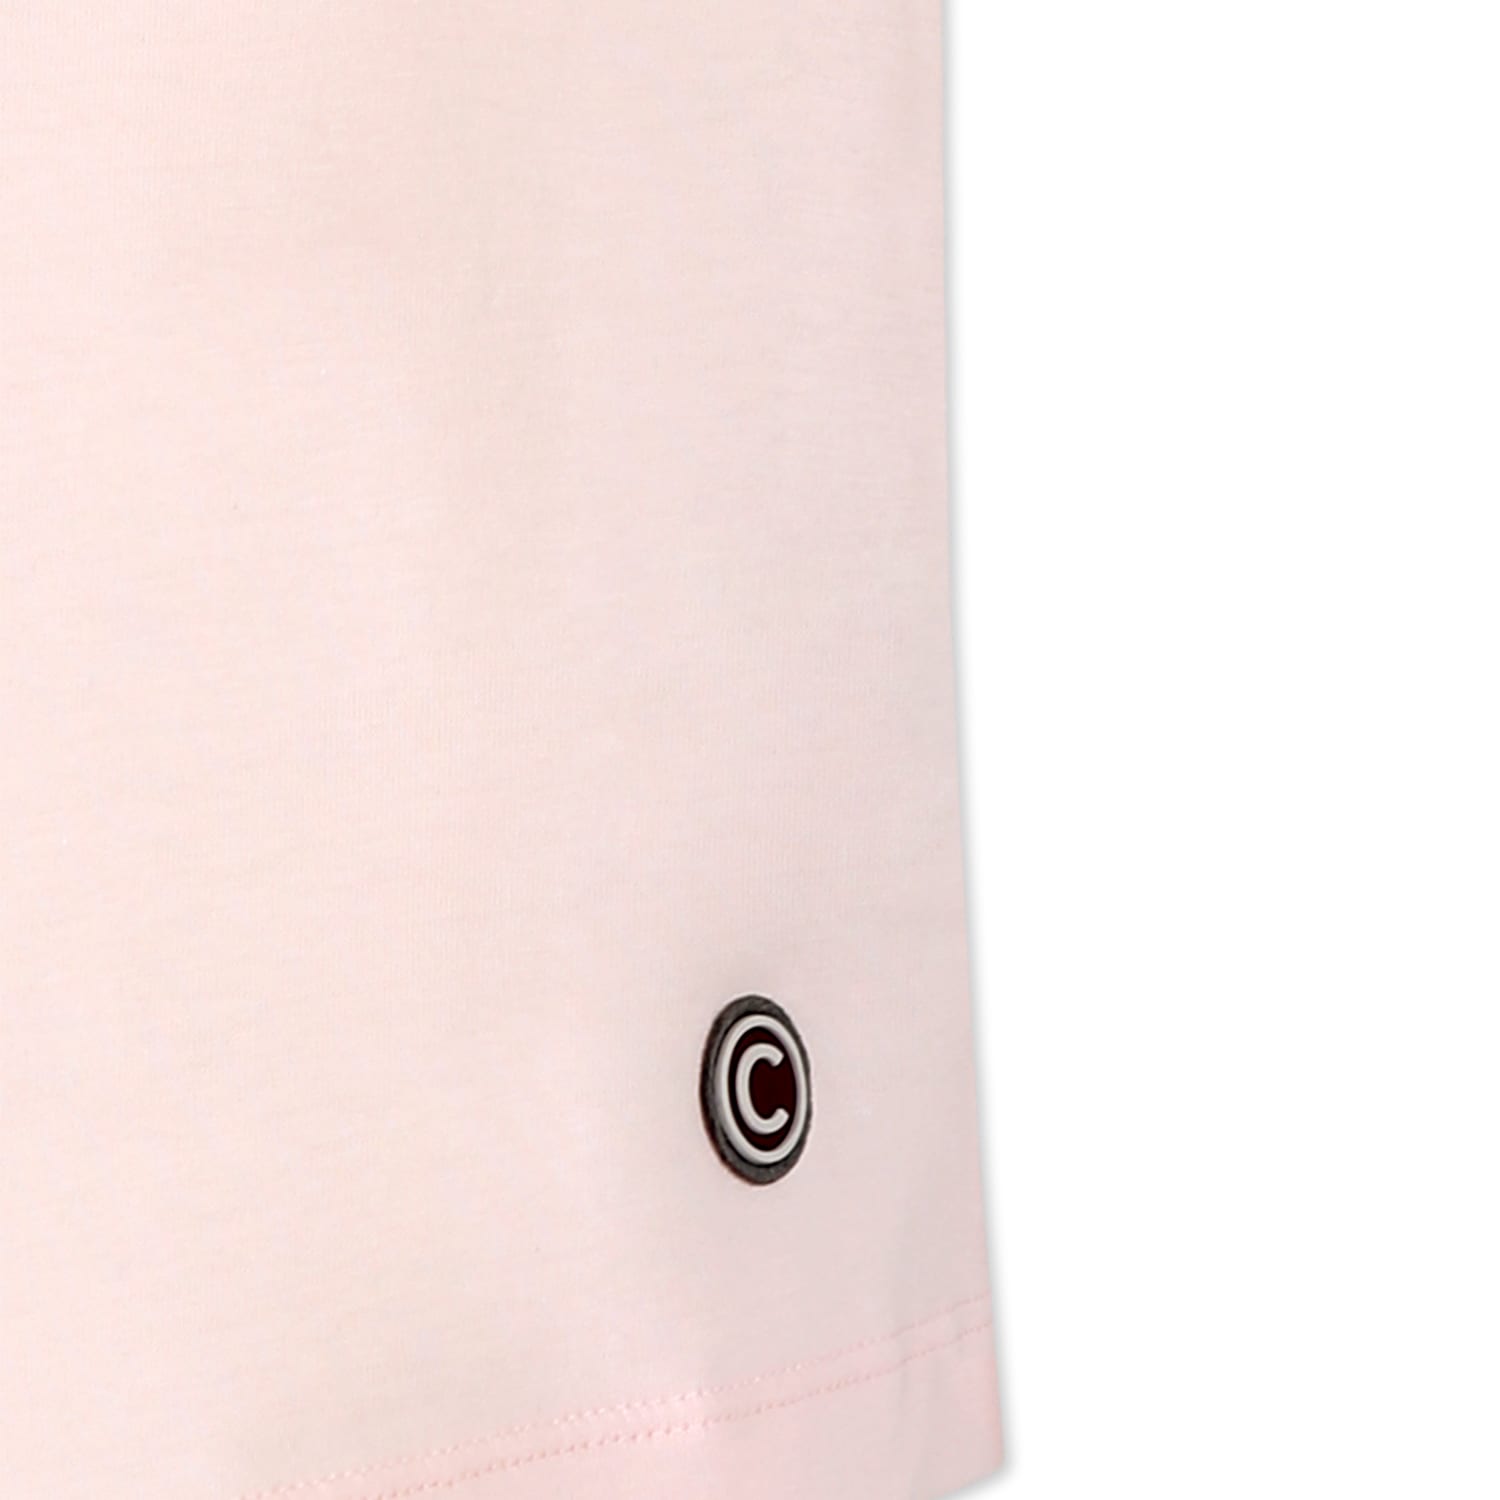 Shop Colmar Pink T-shirt For Girl With Logo